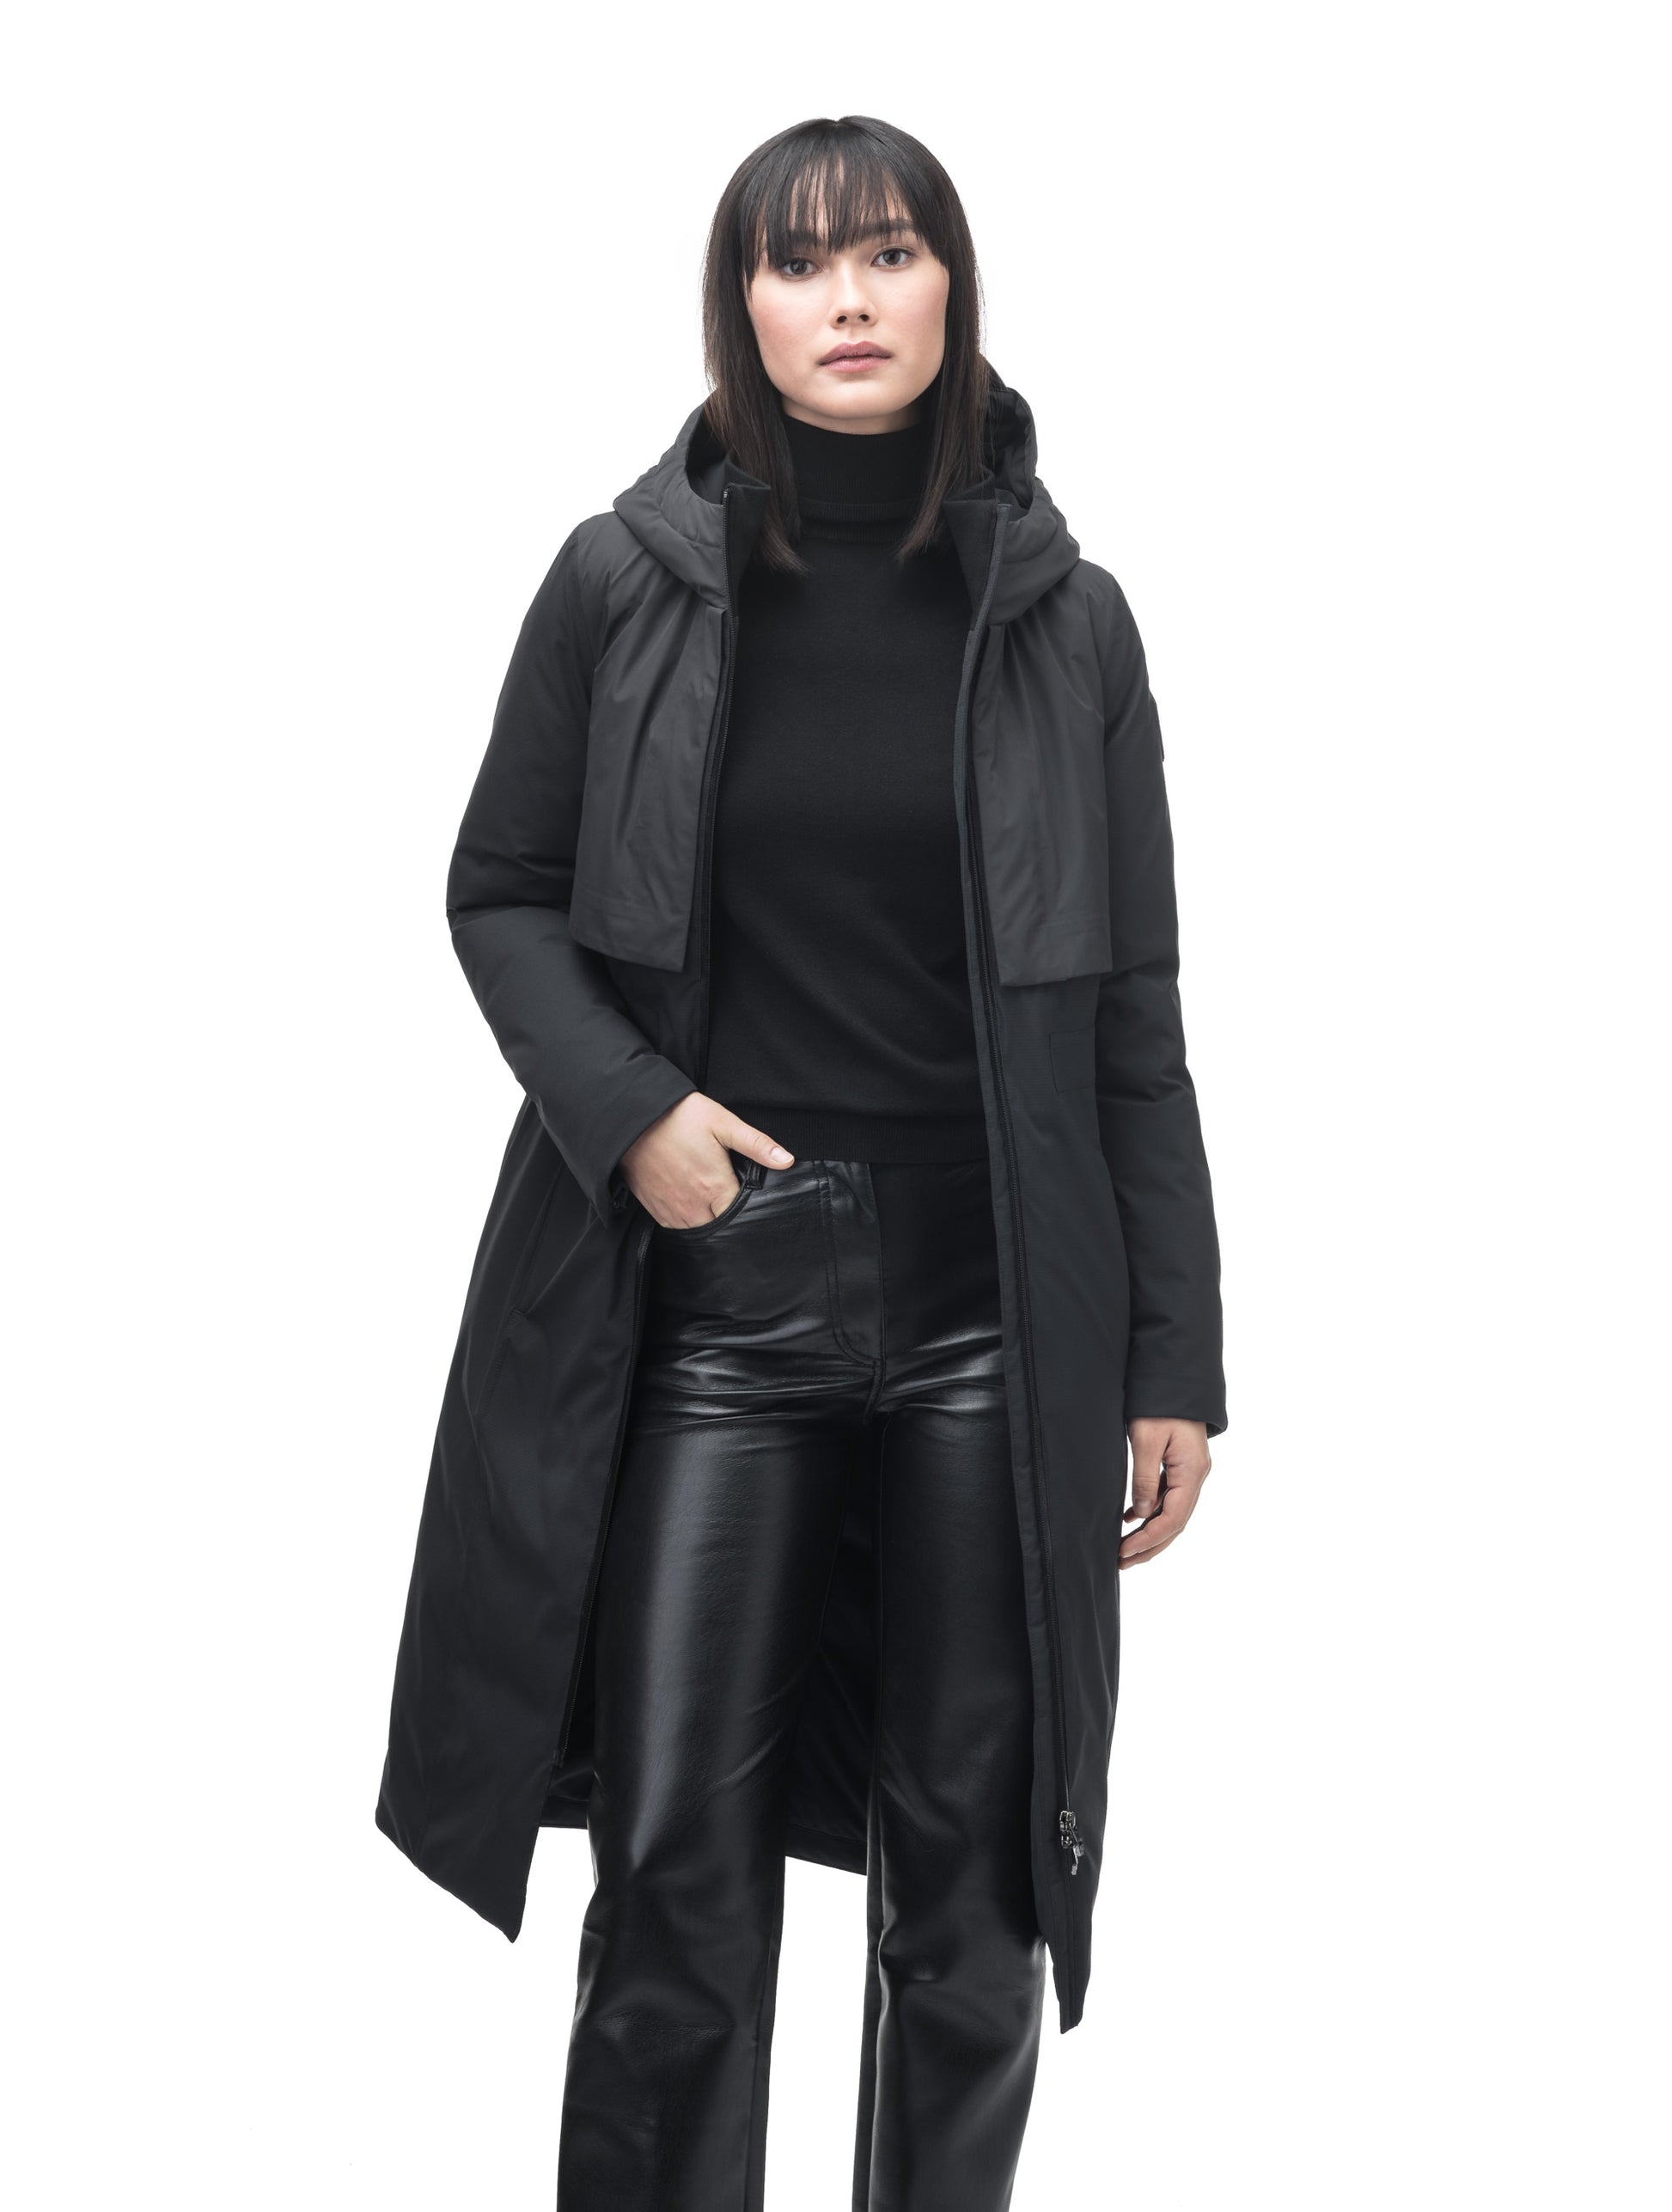 Iris Ladies Long Parka in below the knee length, Canadian duck down insulation, non-removable hood, and two-way zipper, in Black